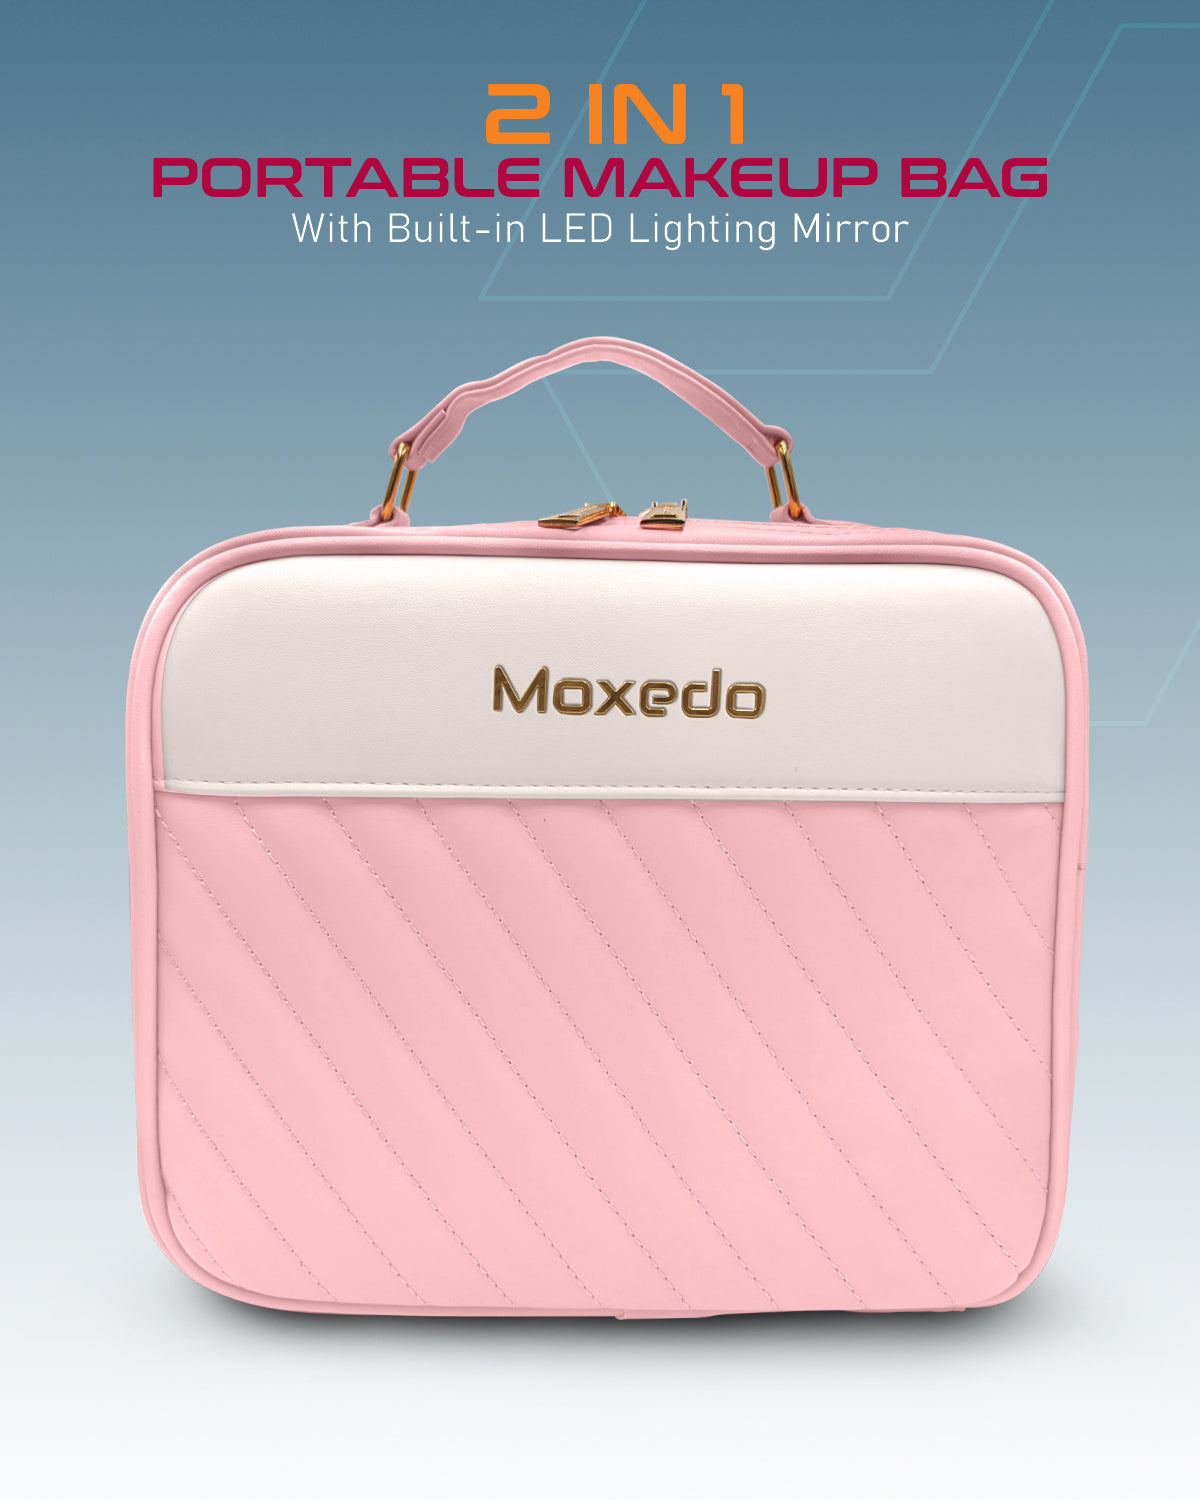 Moxedo 2 in 1 Portable Make-up Bag with Built-in LED Lighting Mirror (Pink)